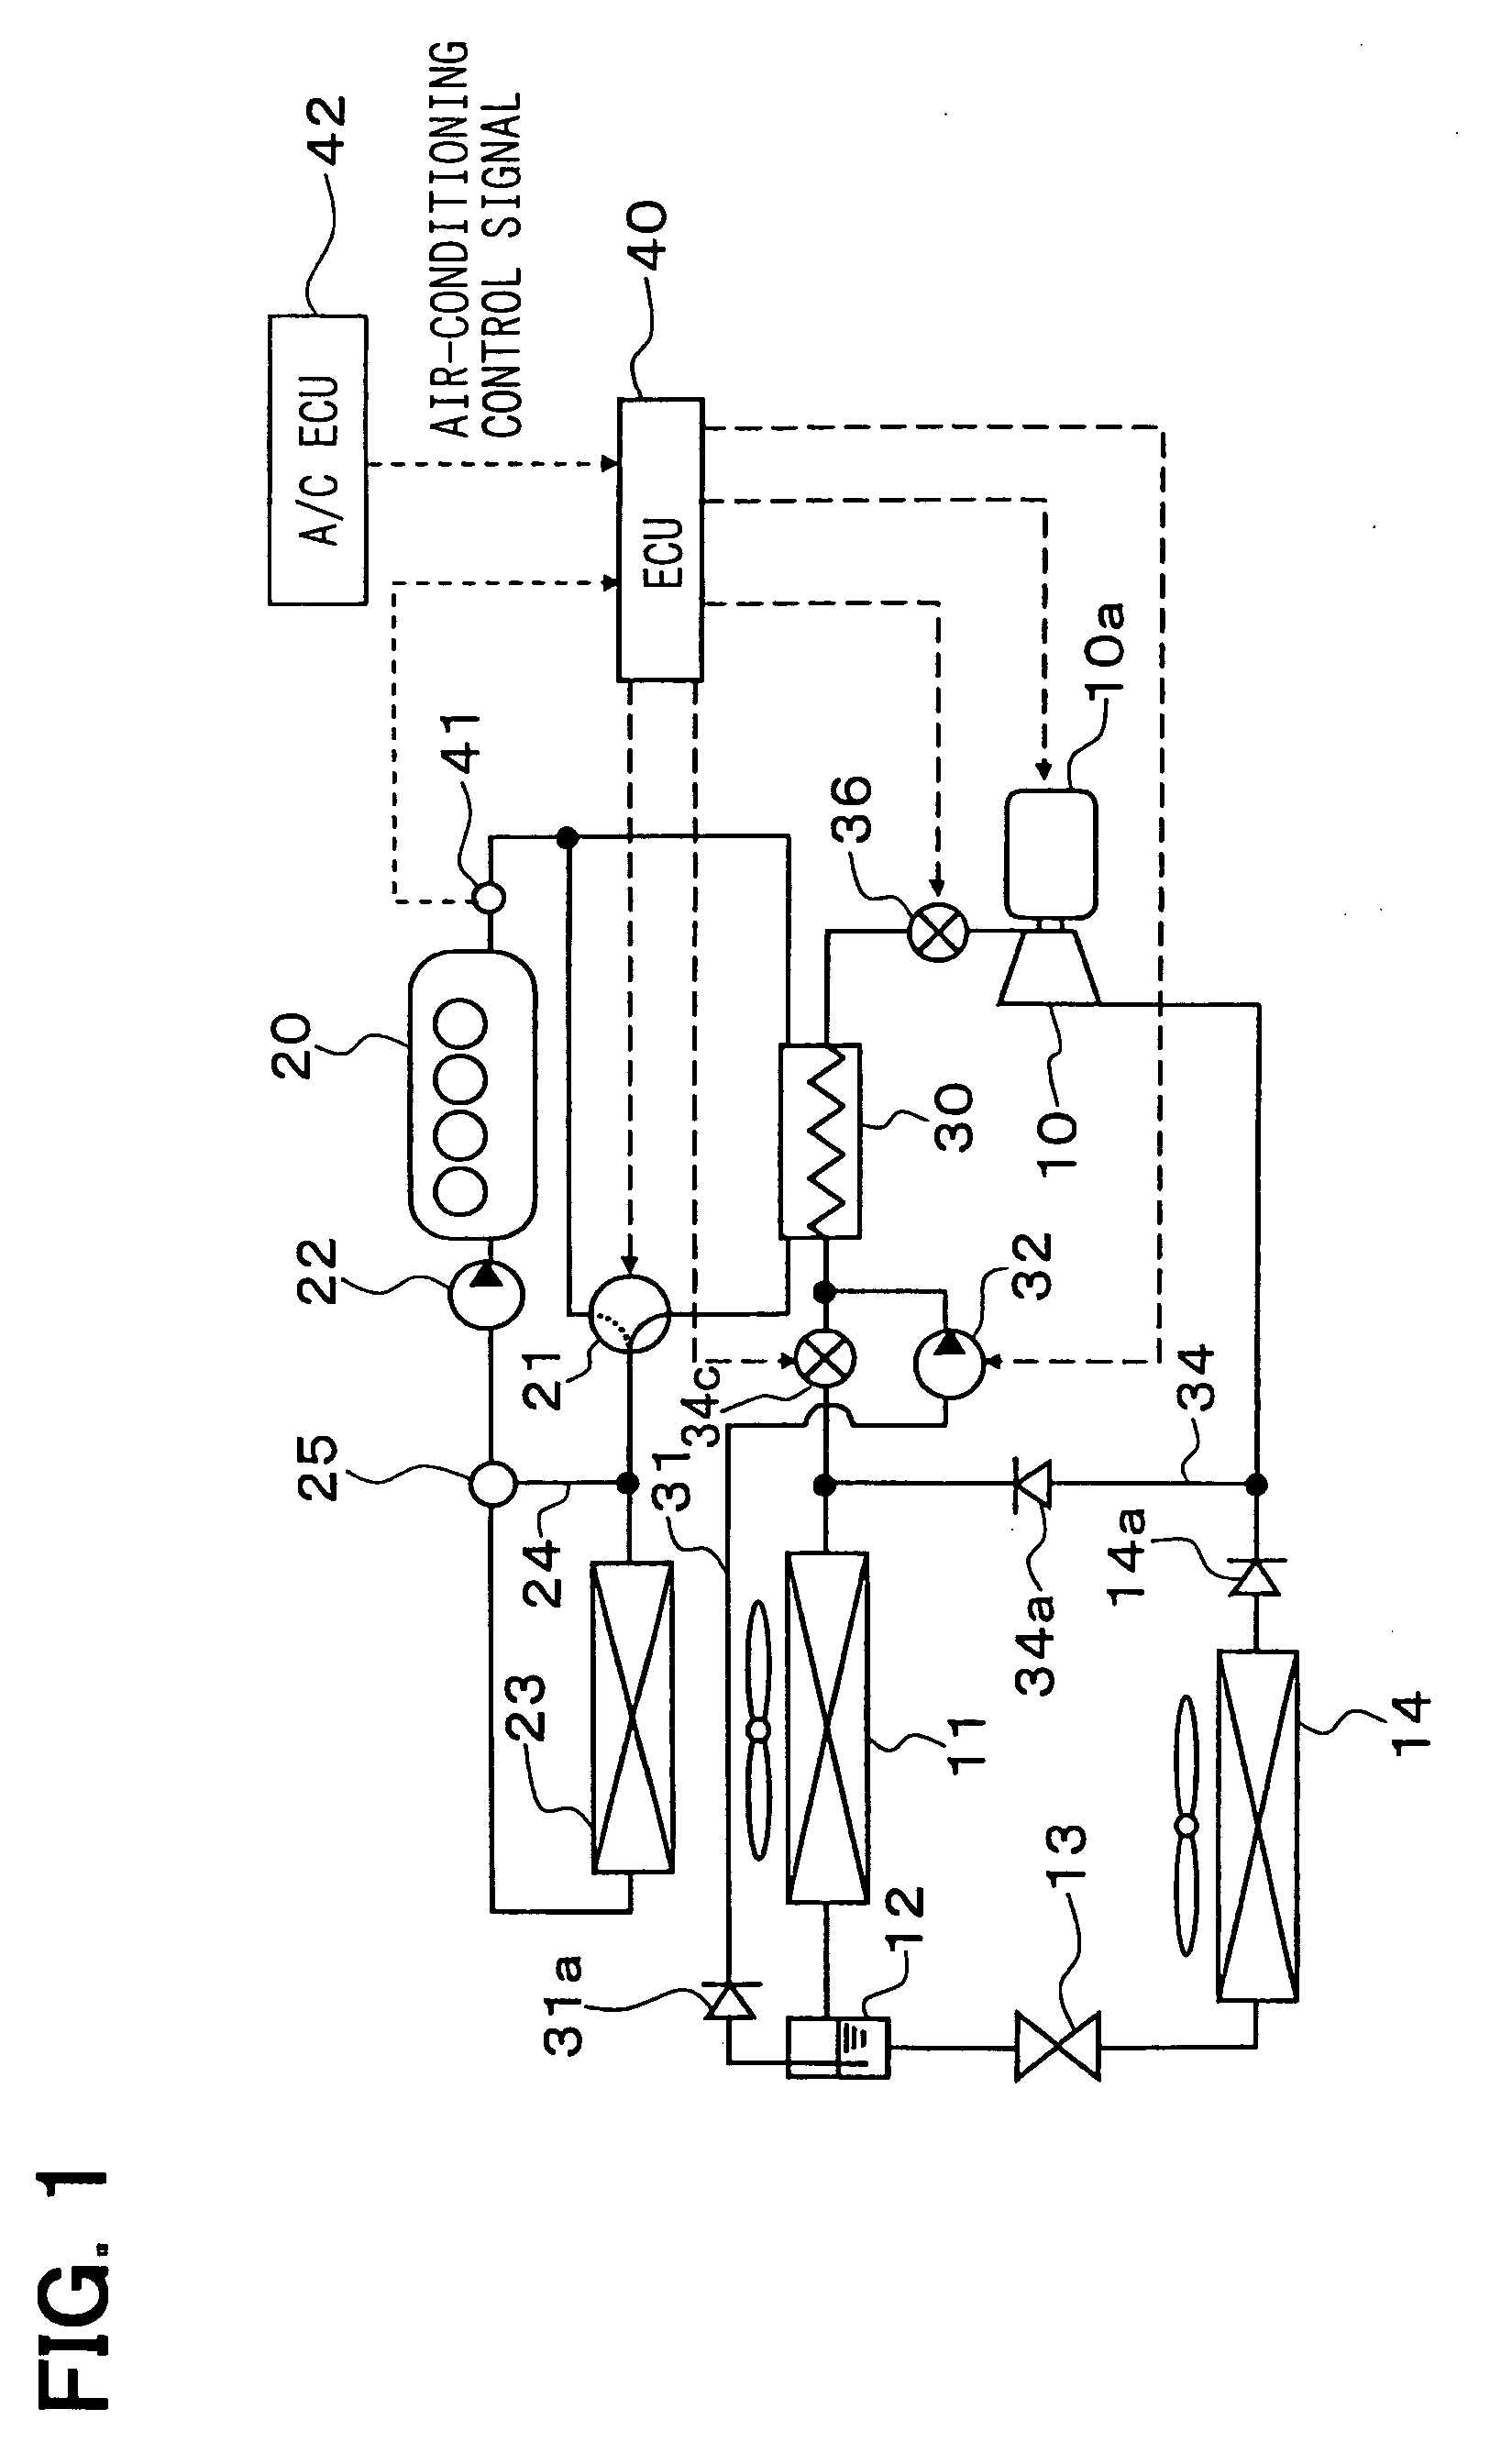 Waste heat collecting system having rankine cycle and heating cycle